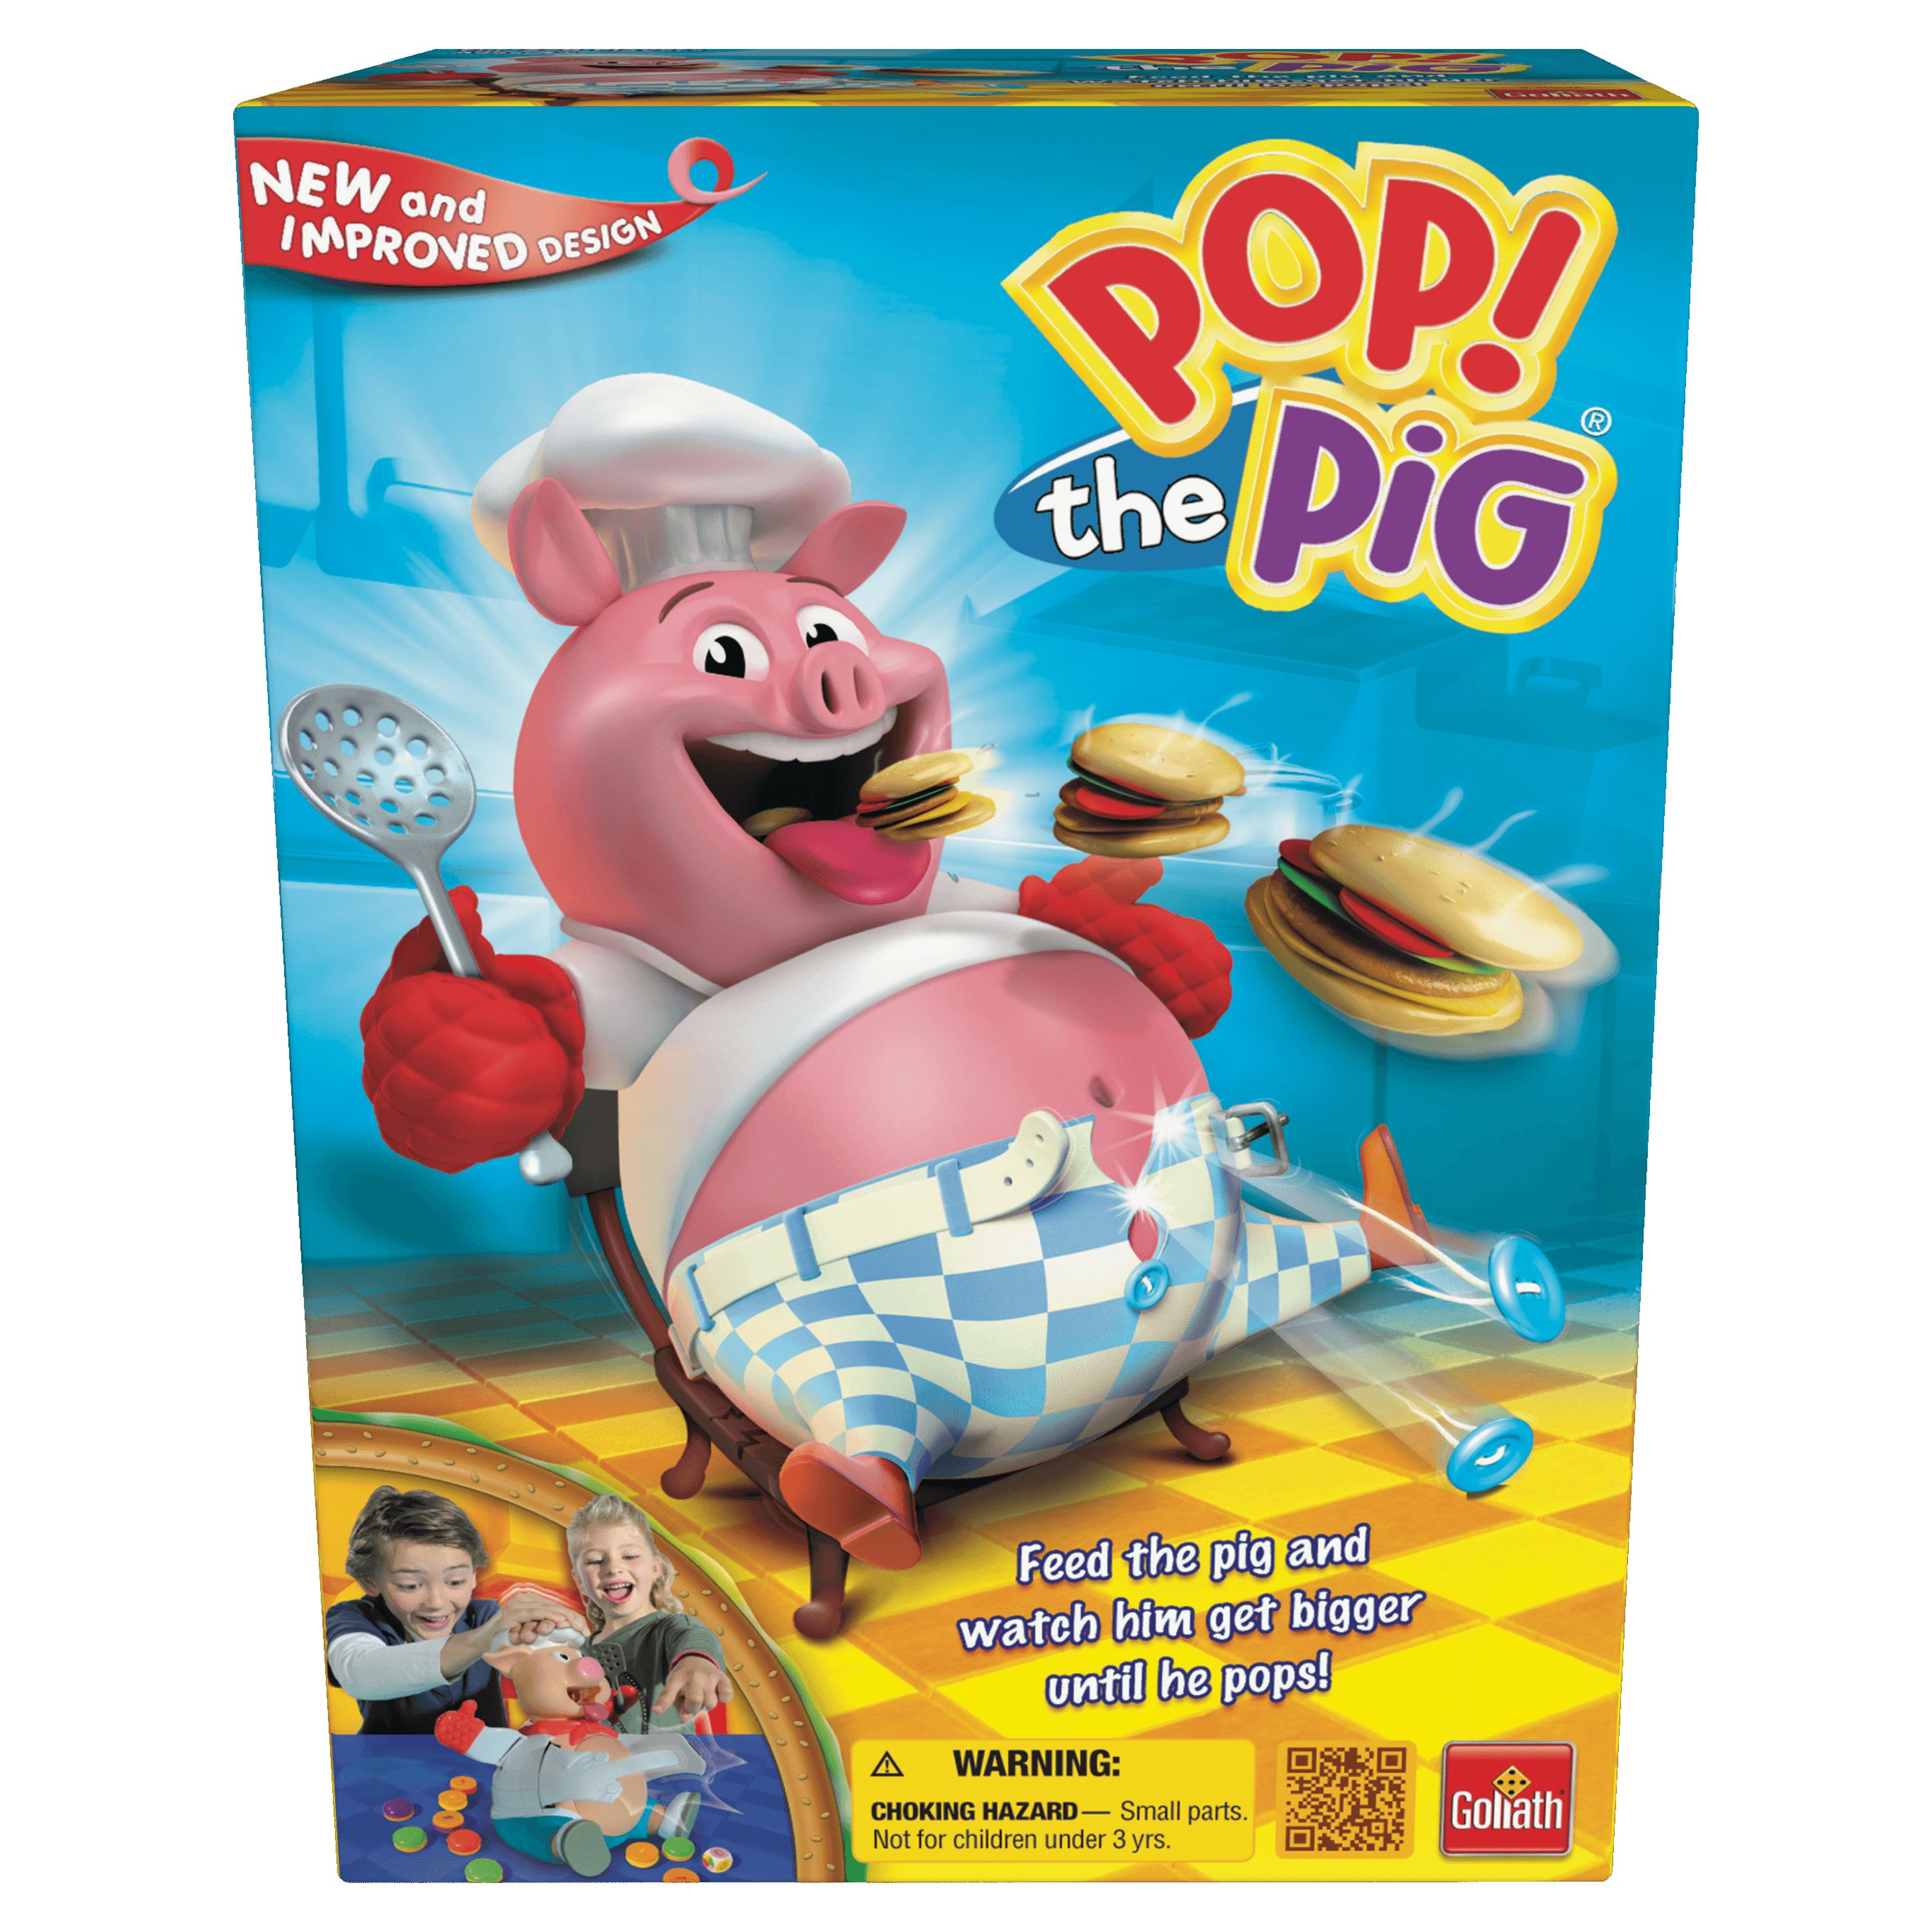 Goliath Pop the Pig Children's Game - Belly-Busting Fun, Feed Him Burgers, His Belly Grows - image 1 of 6